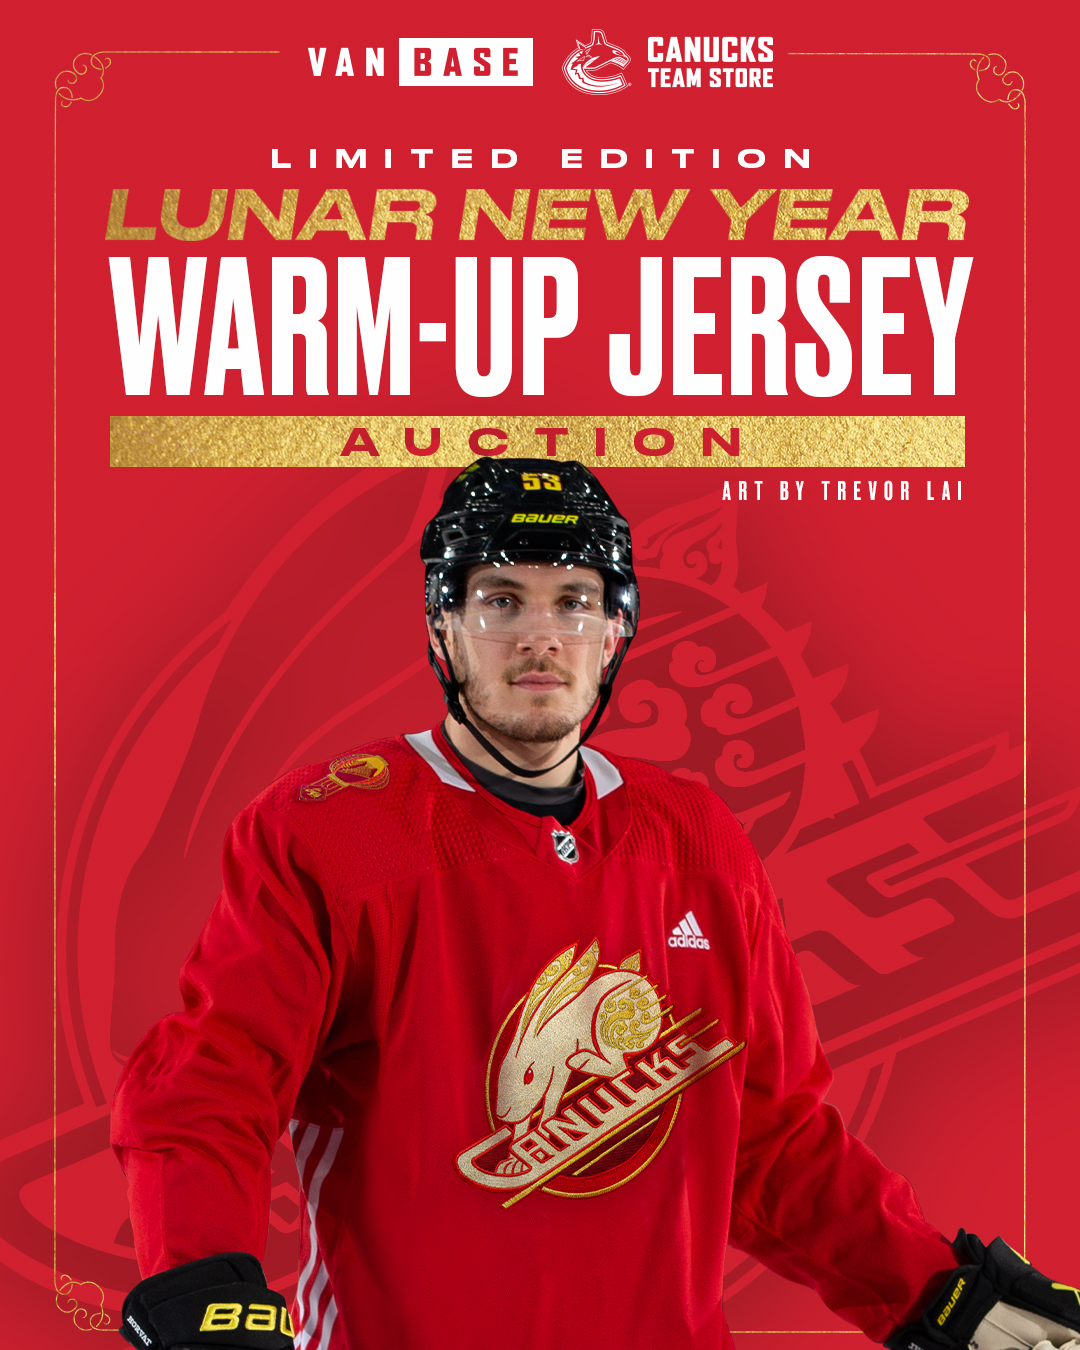 Artist behind Canucks' Lunar New Year jersey hopes to counter anti